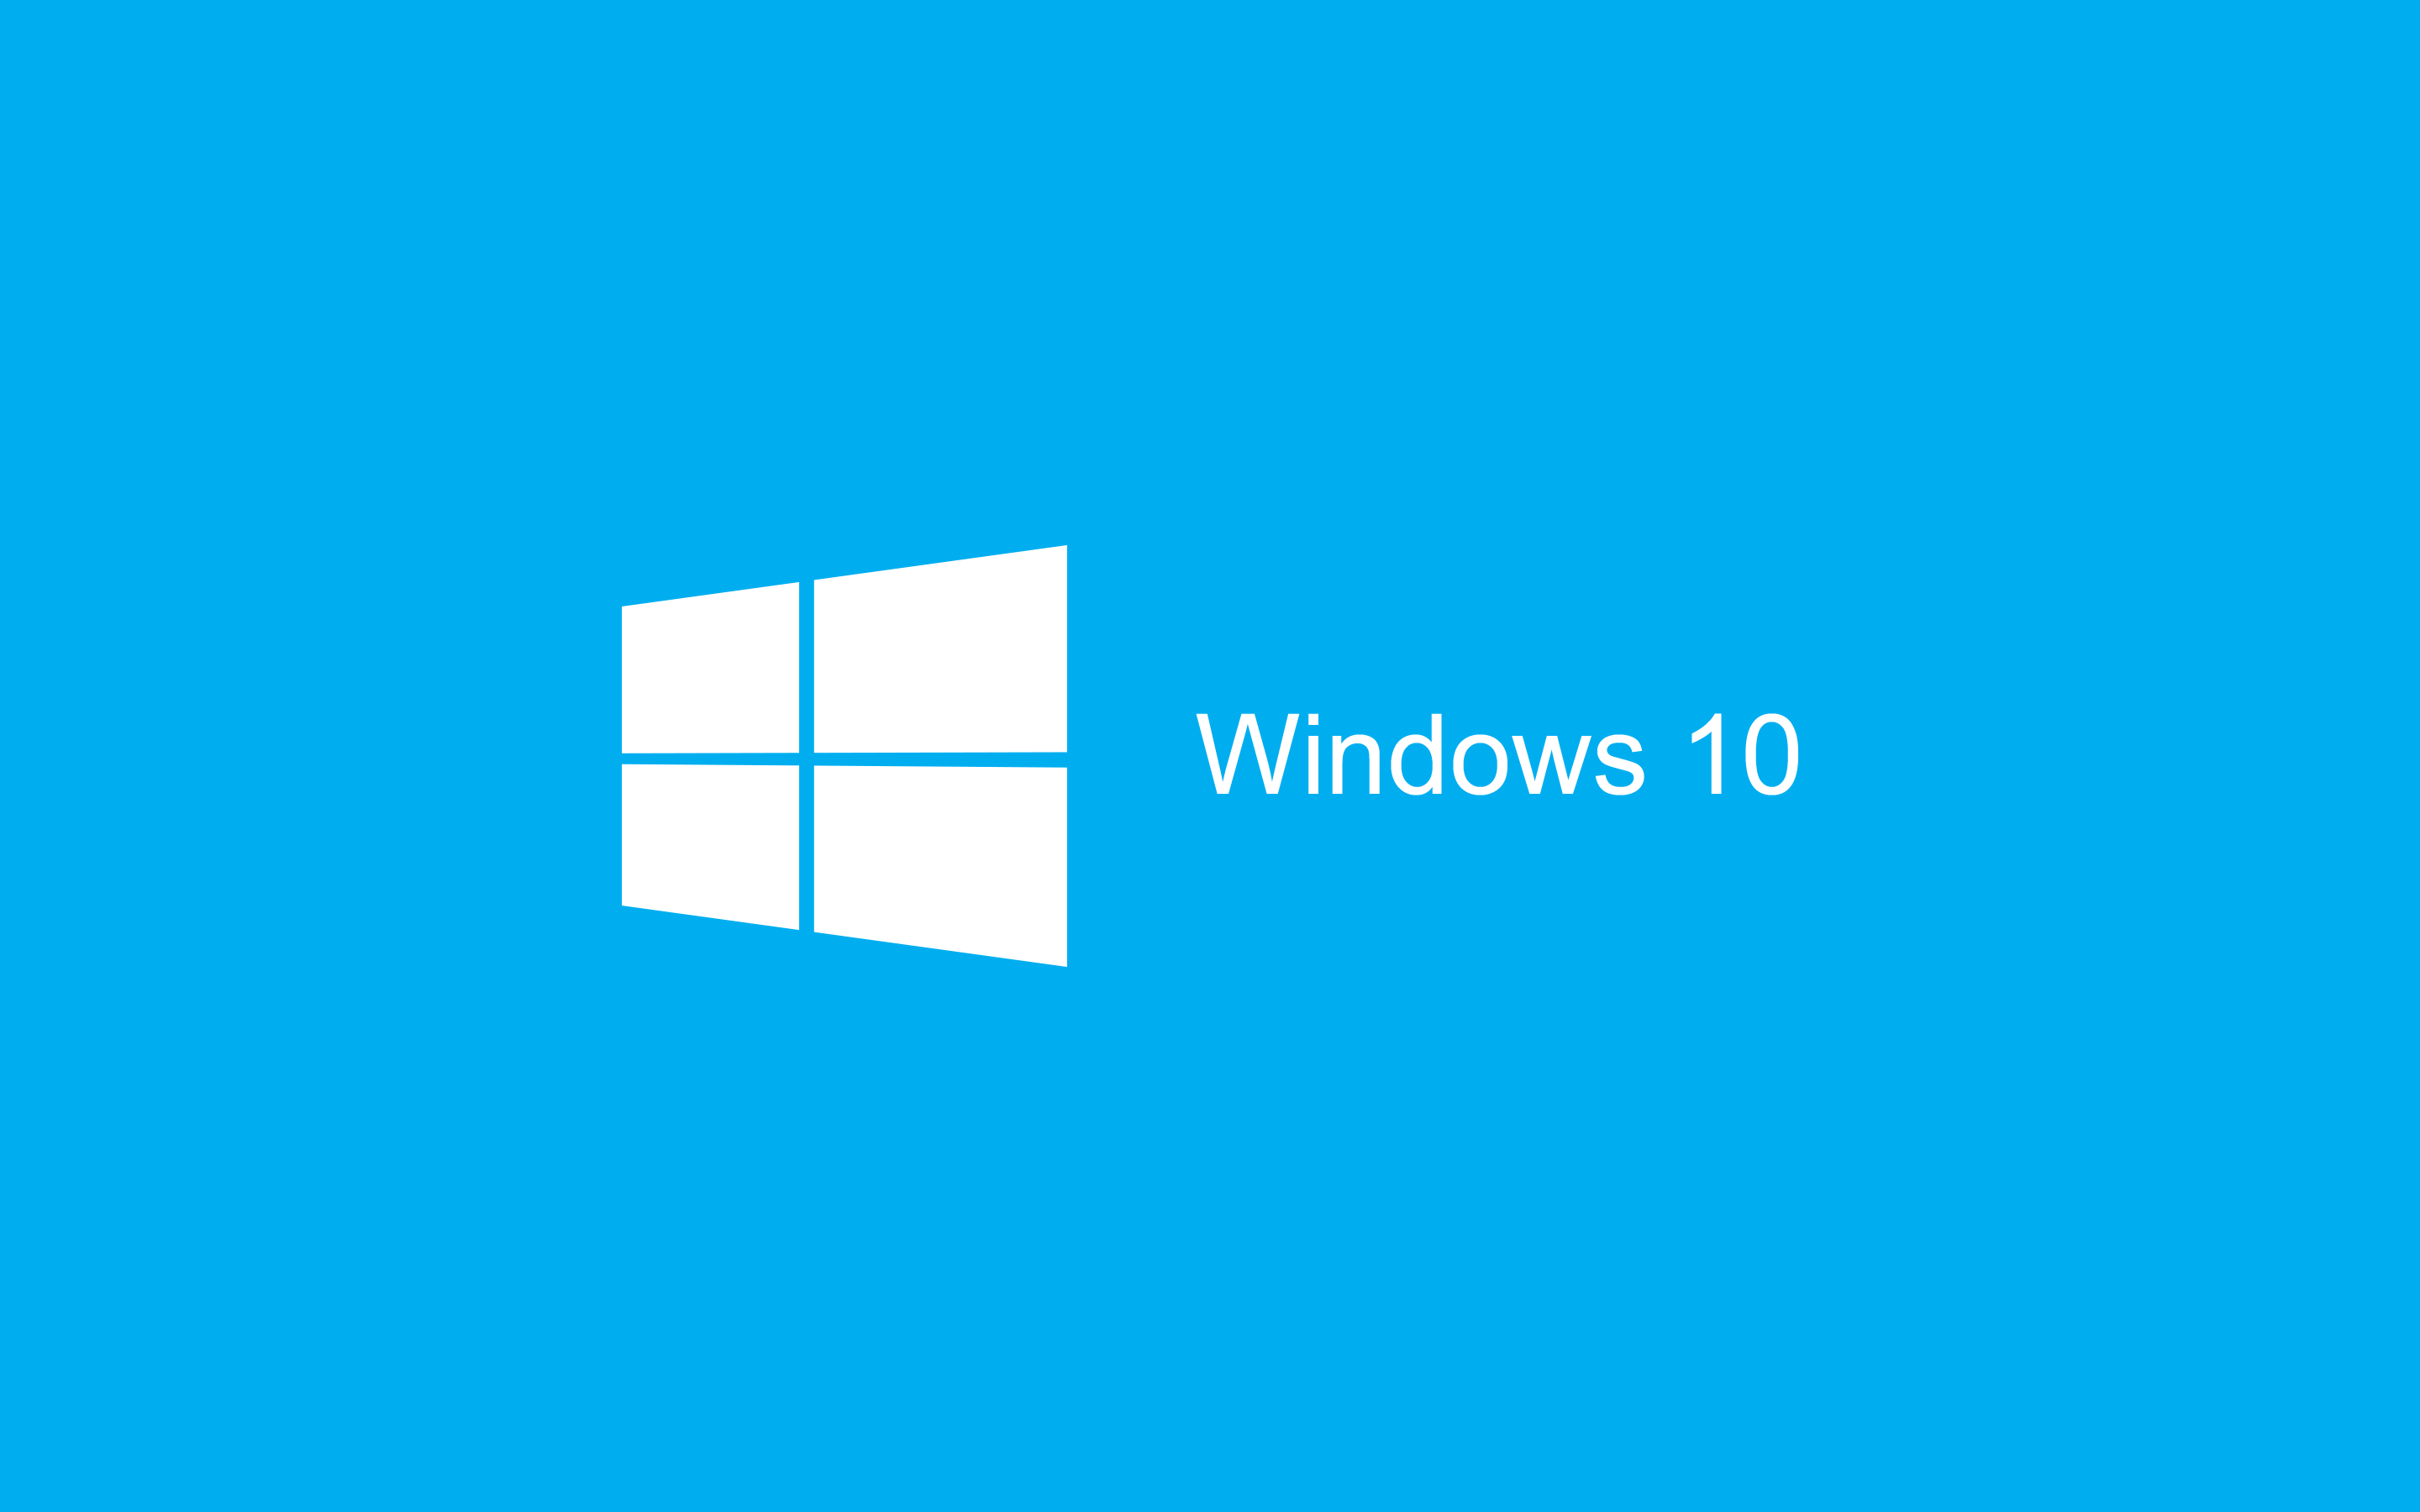 Windows 10: Designed With Gamers in Mind